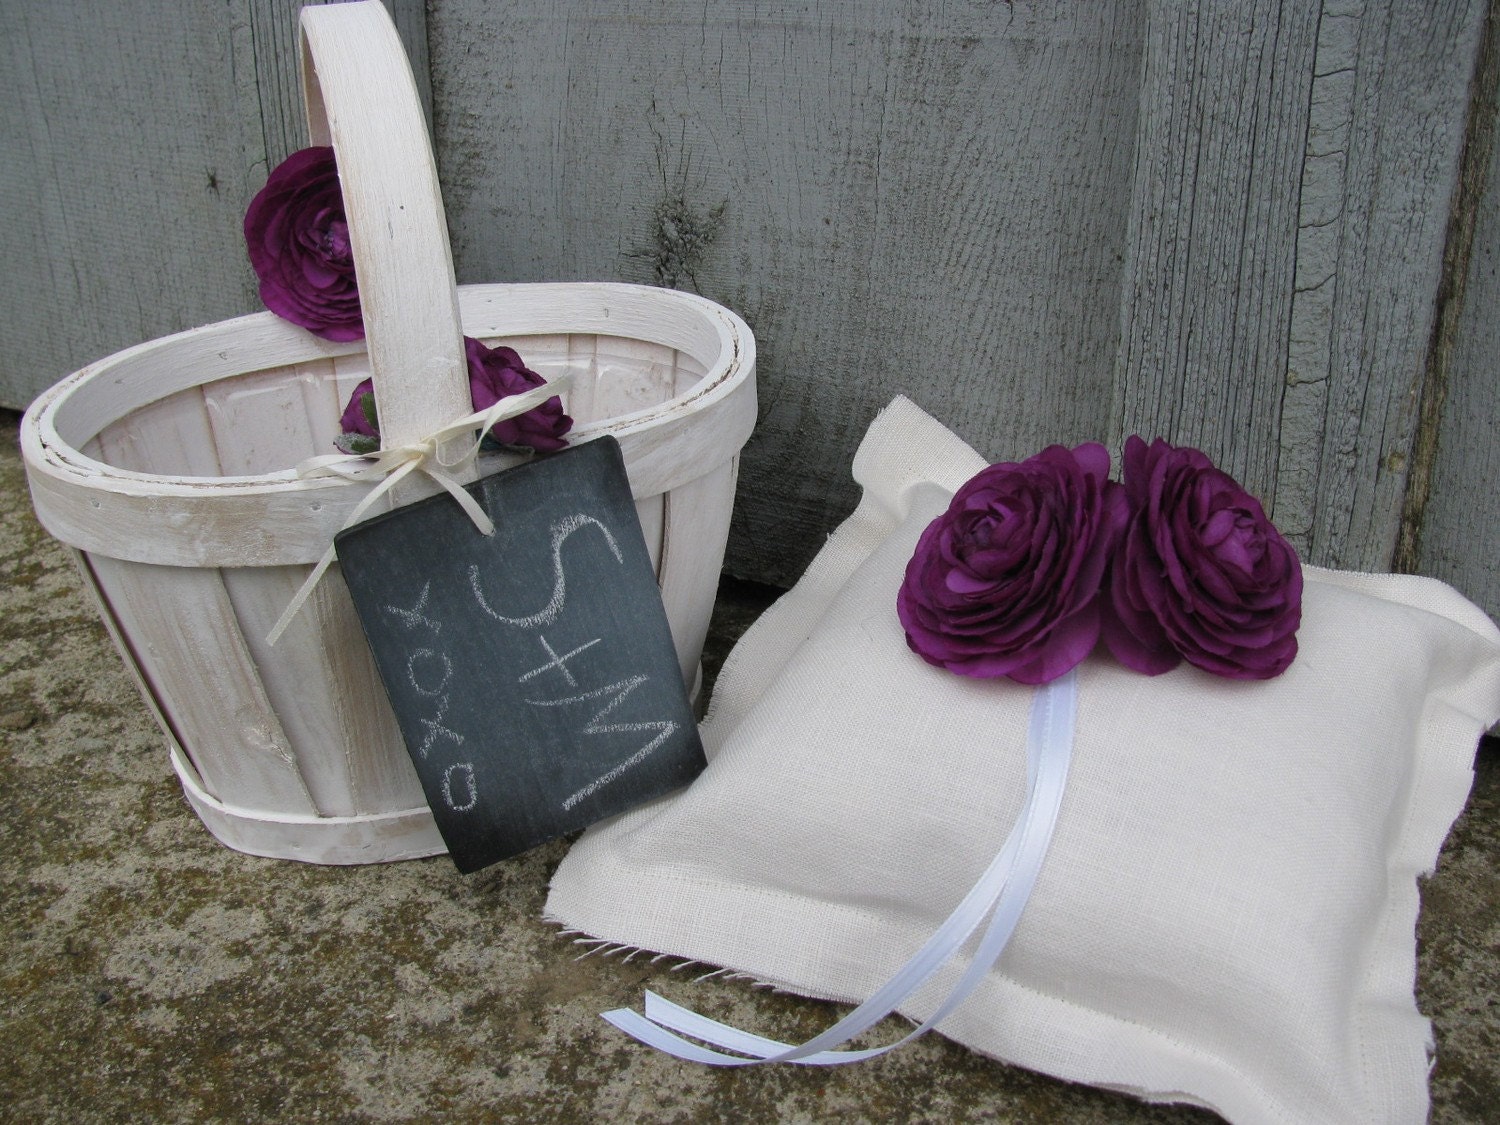 Woodland Outdoor Rustic Linen Wedding SET OF 2 MATCHING Ring Bearer Pillow and Flower Girl Basket with Personalized Chalkboard Tag You Customize Flowers Plum/Purple shown